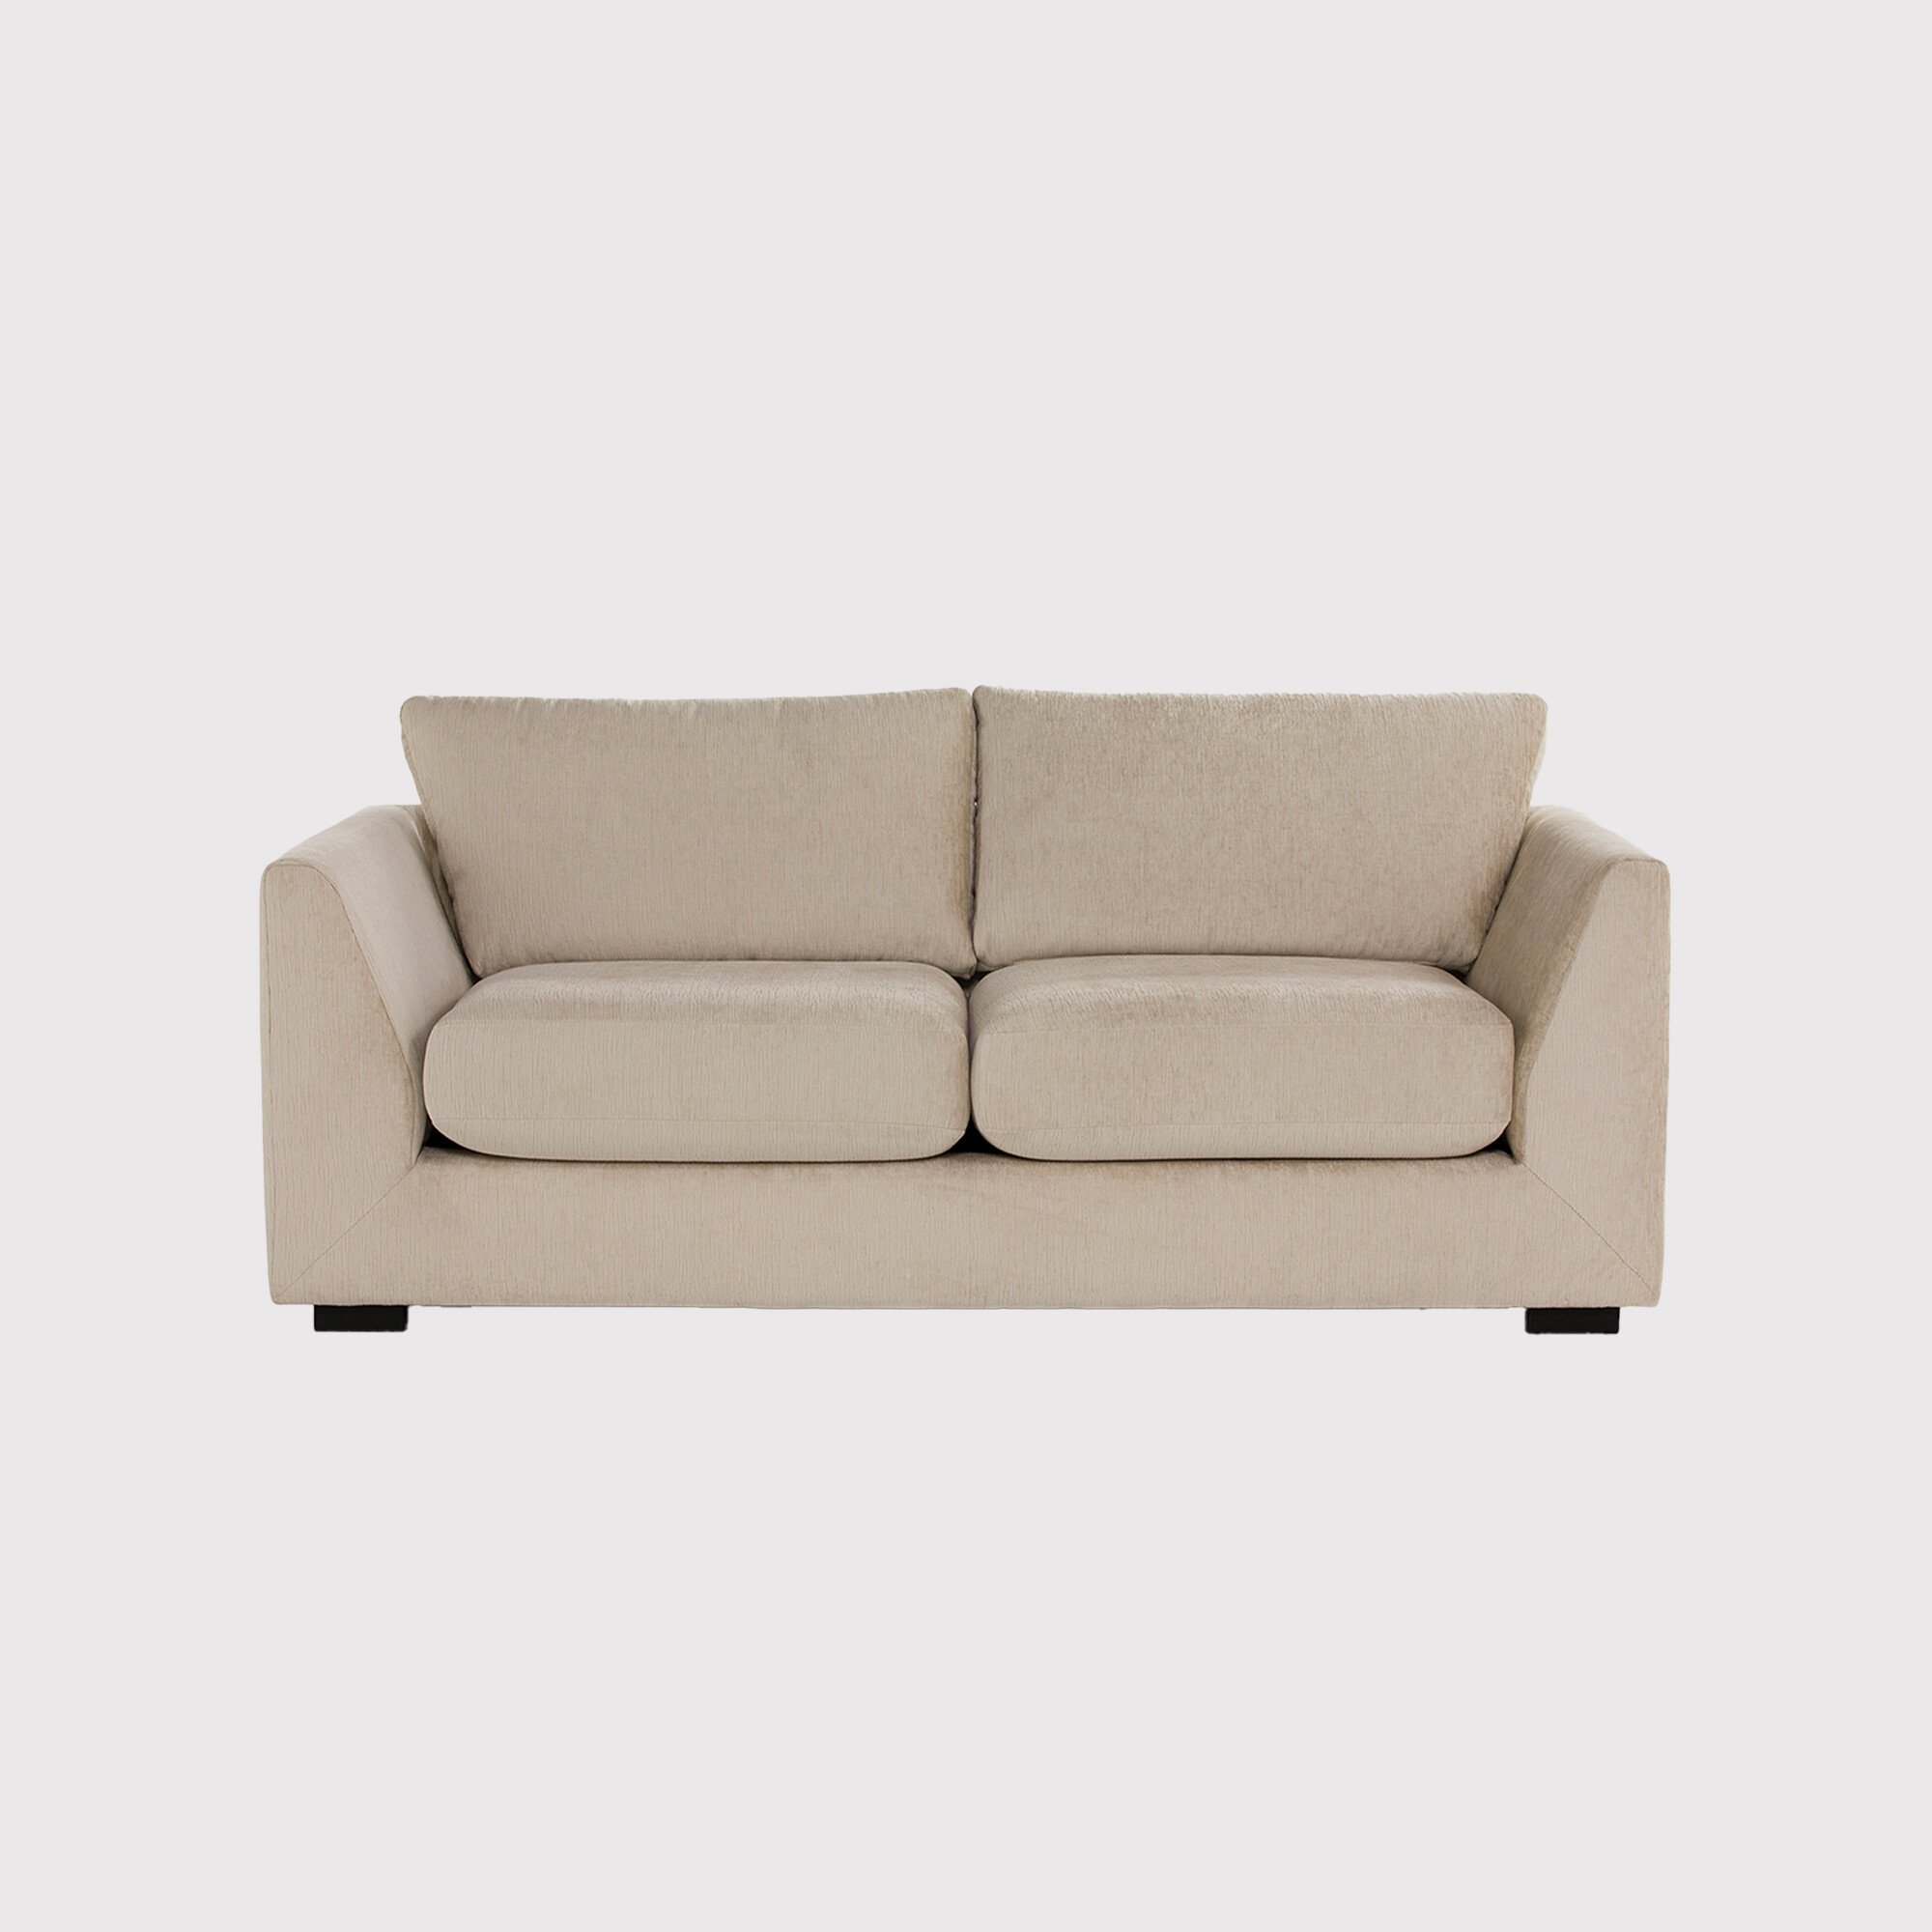 Melby 3 Seater Sofa, Neutral Fabric | Barker & Stonehouse